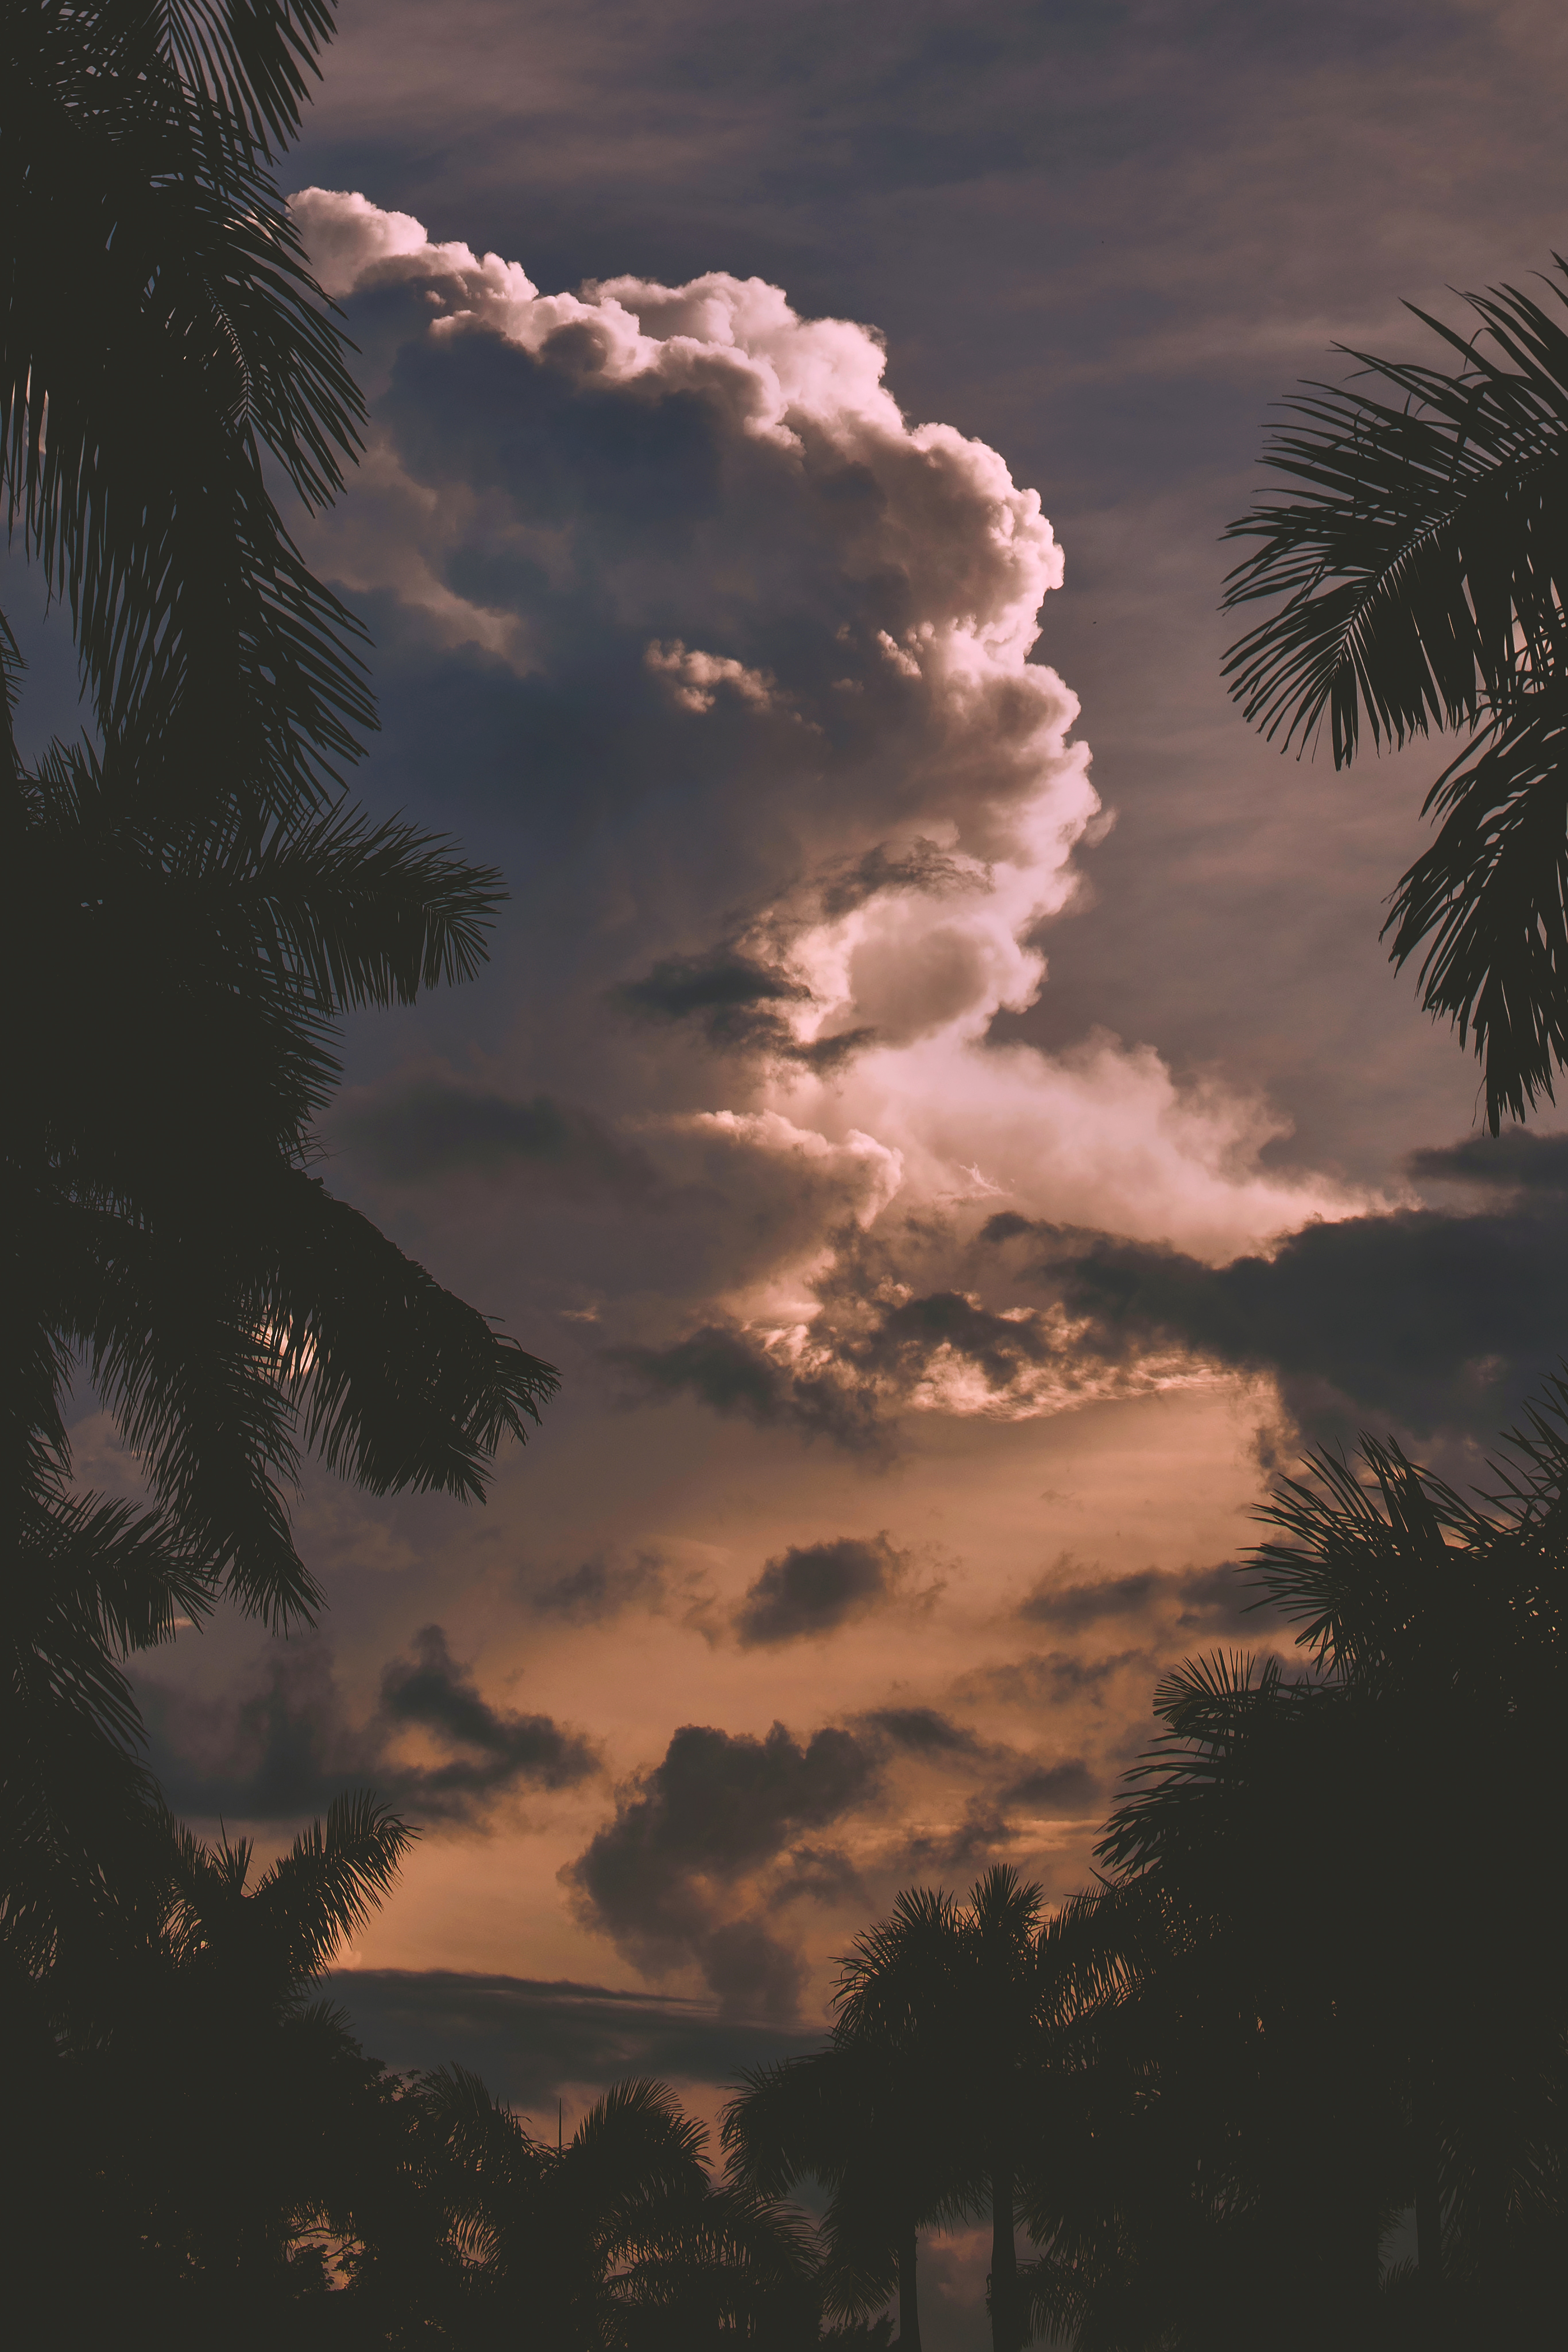 clouds, palms, branches, sunset, trees, nature wallpaper for mobile